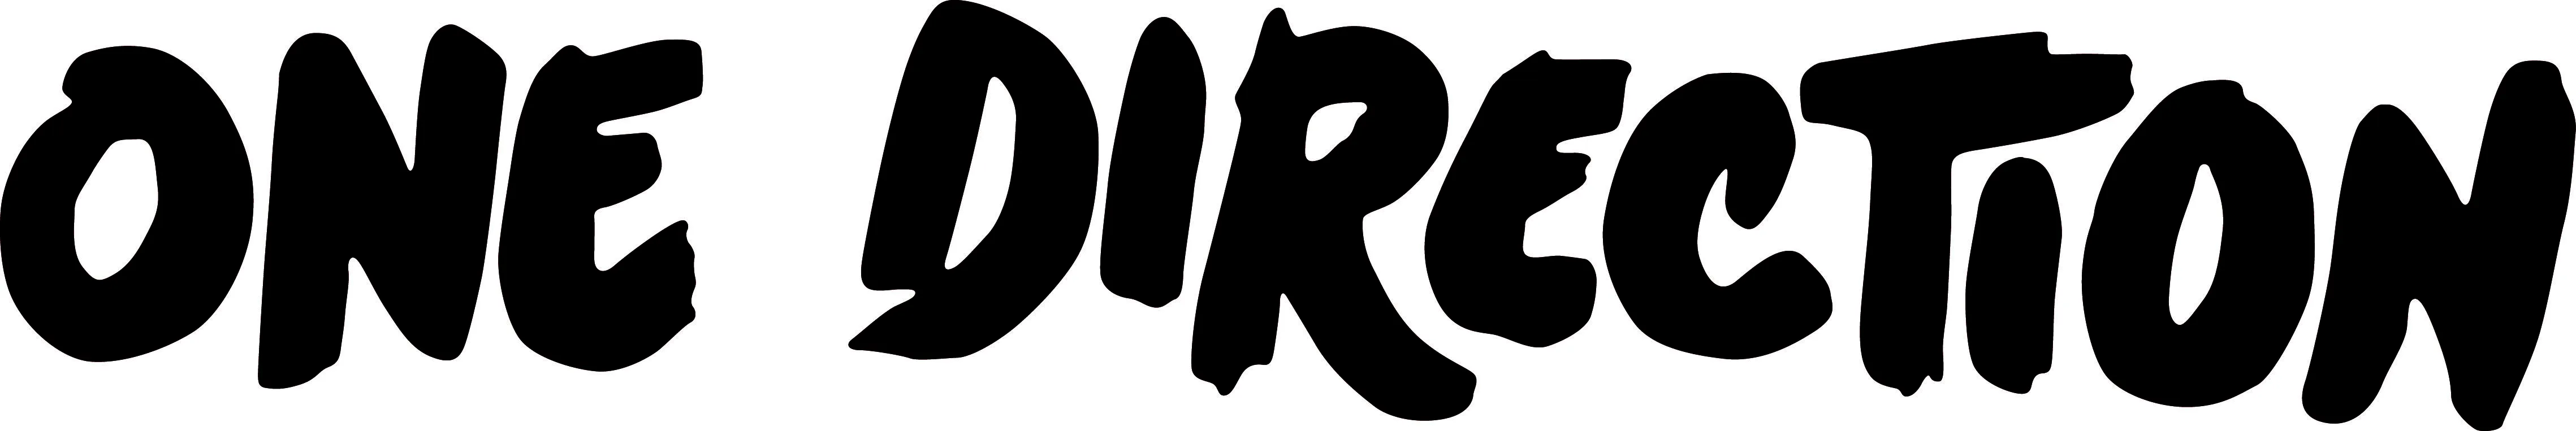 One Direction - Logopedia, the logo and branding site